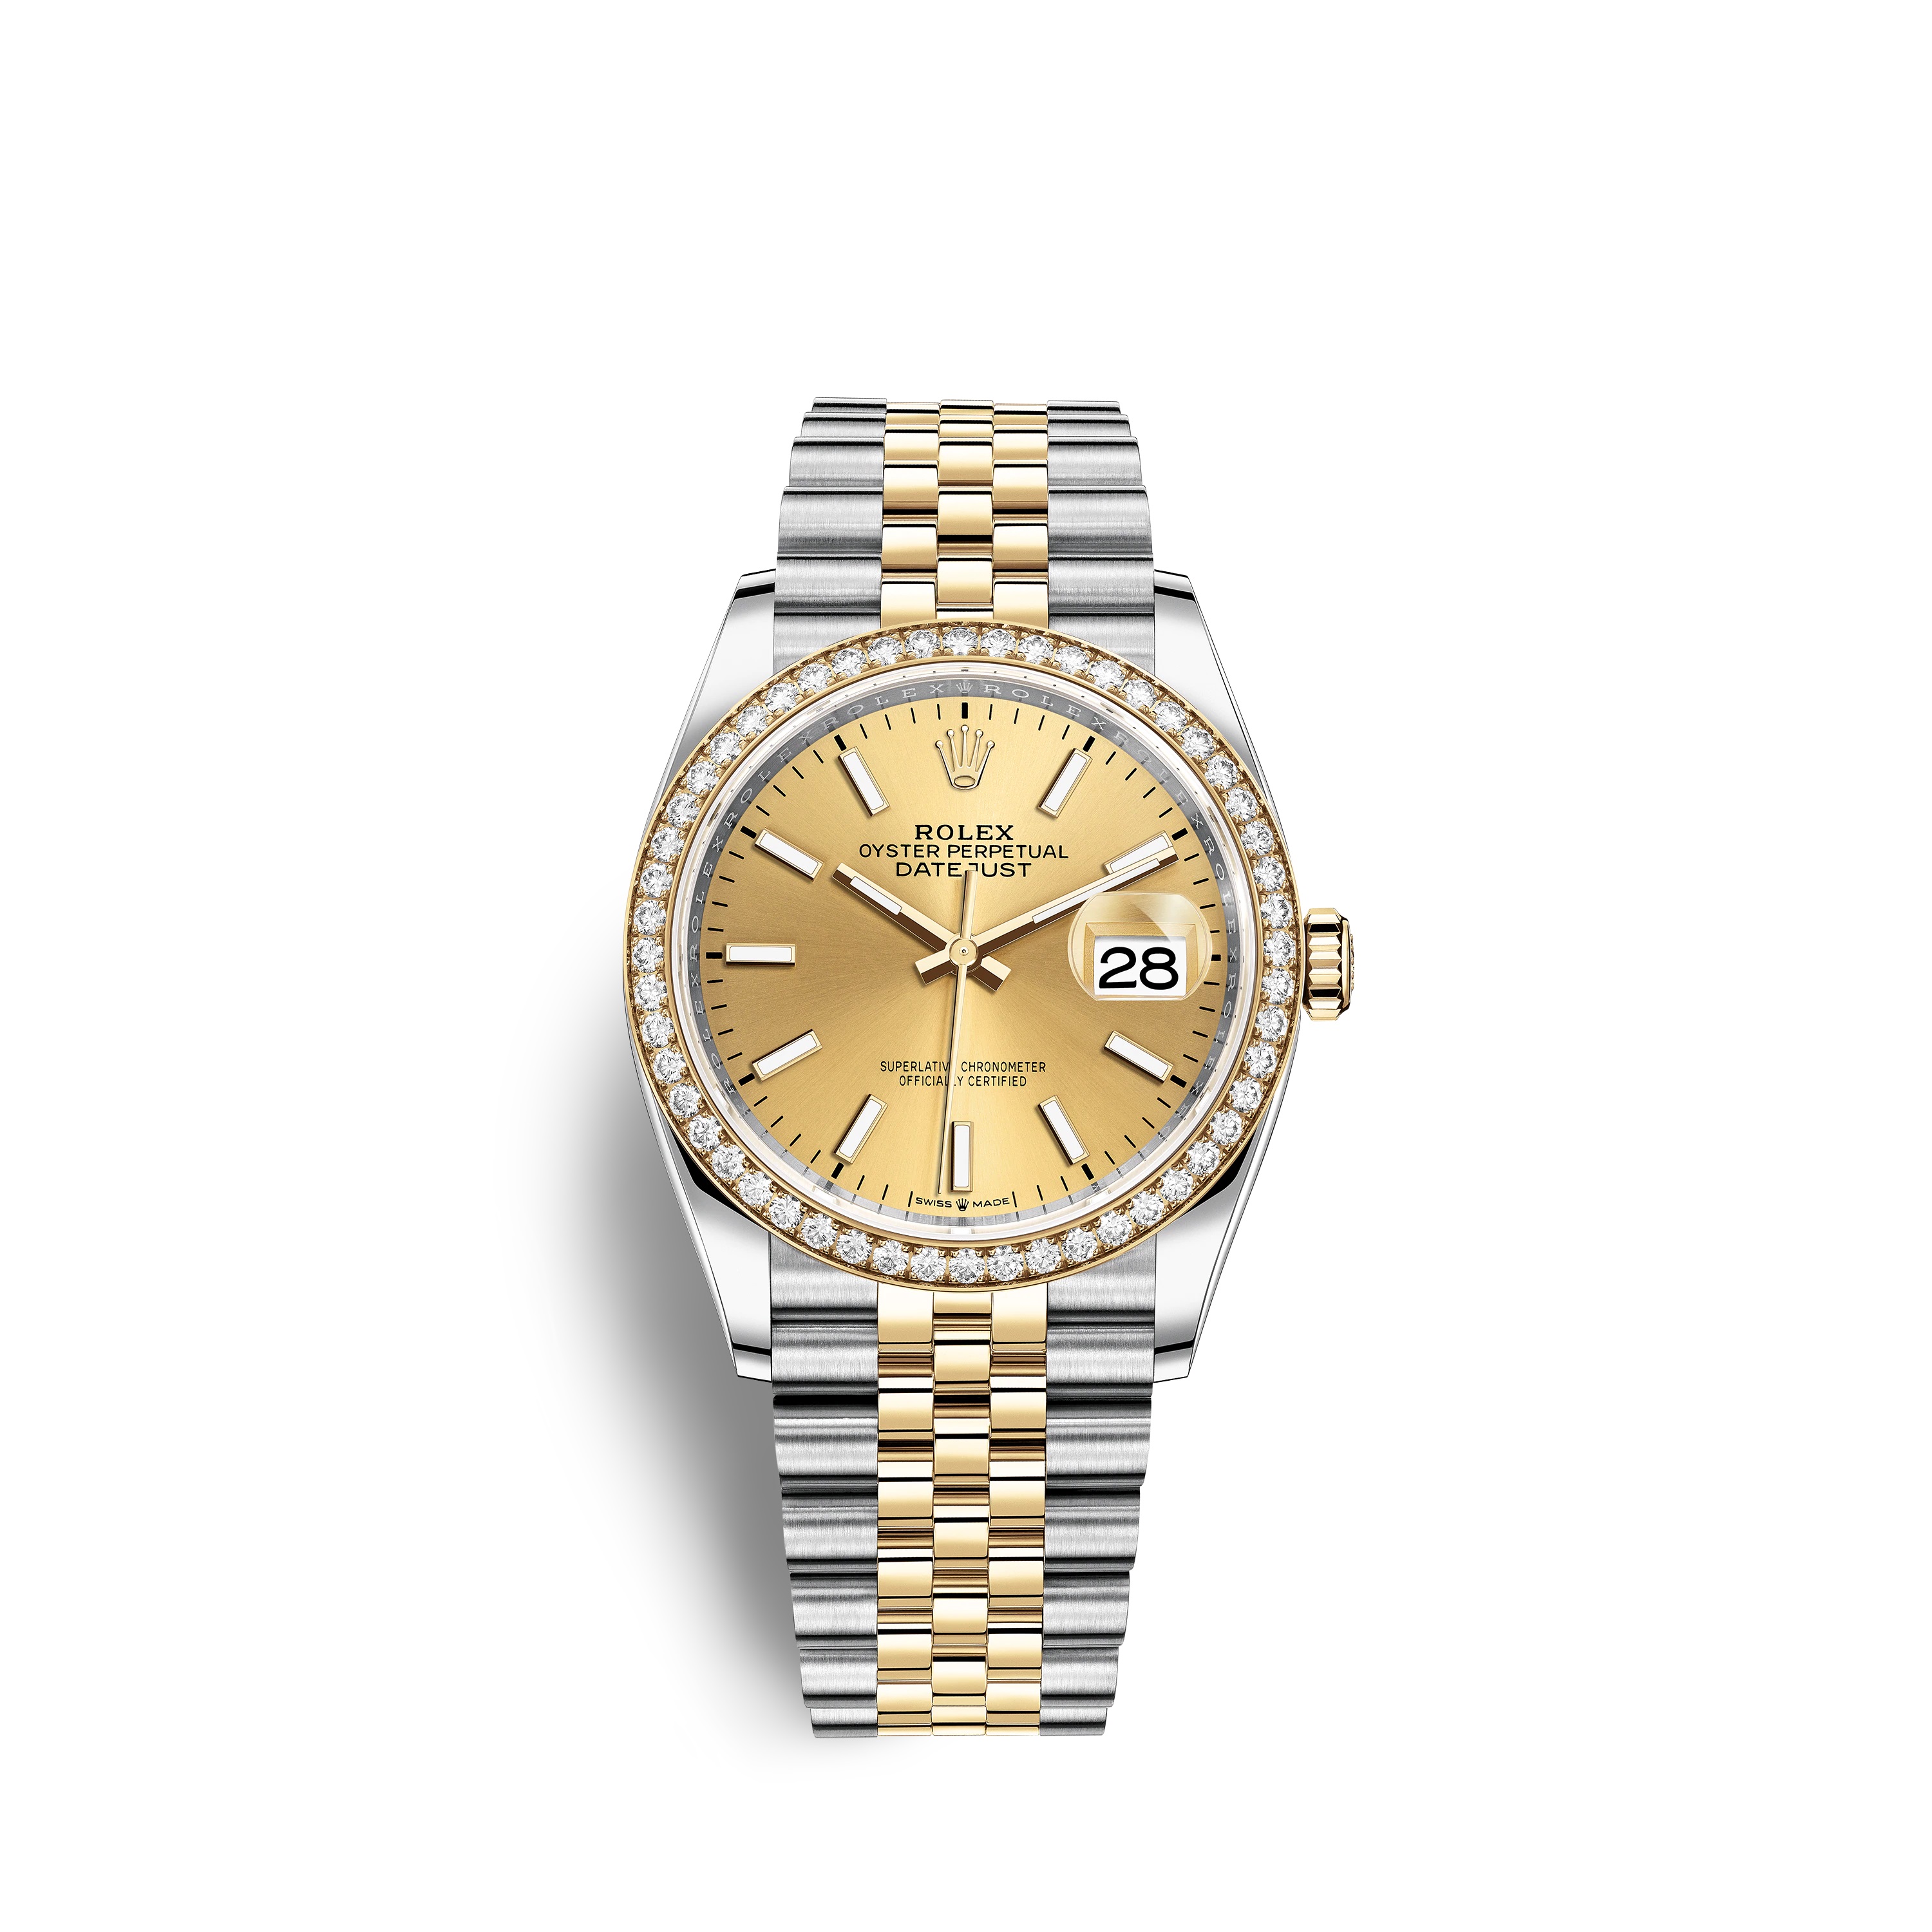 Datejust 36 126283RBR Gold & Stainless Steel Watch (Champagne-Color)